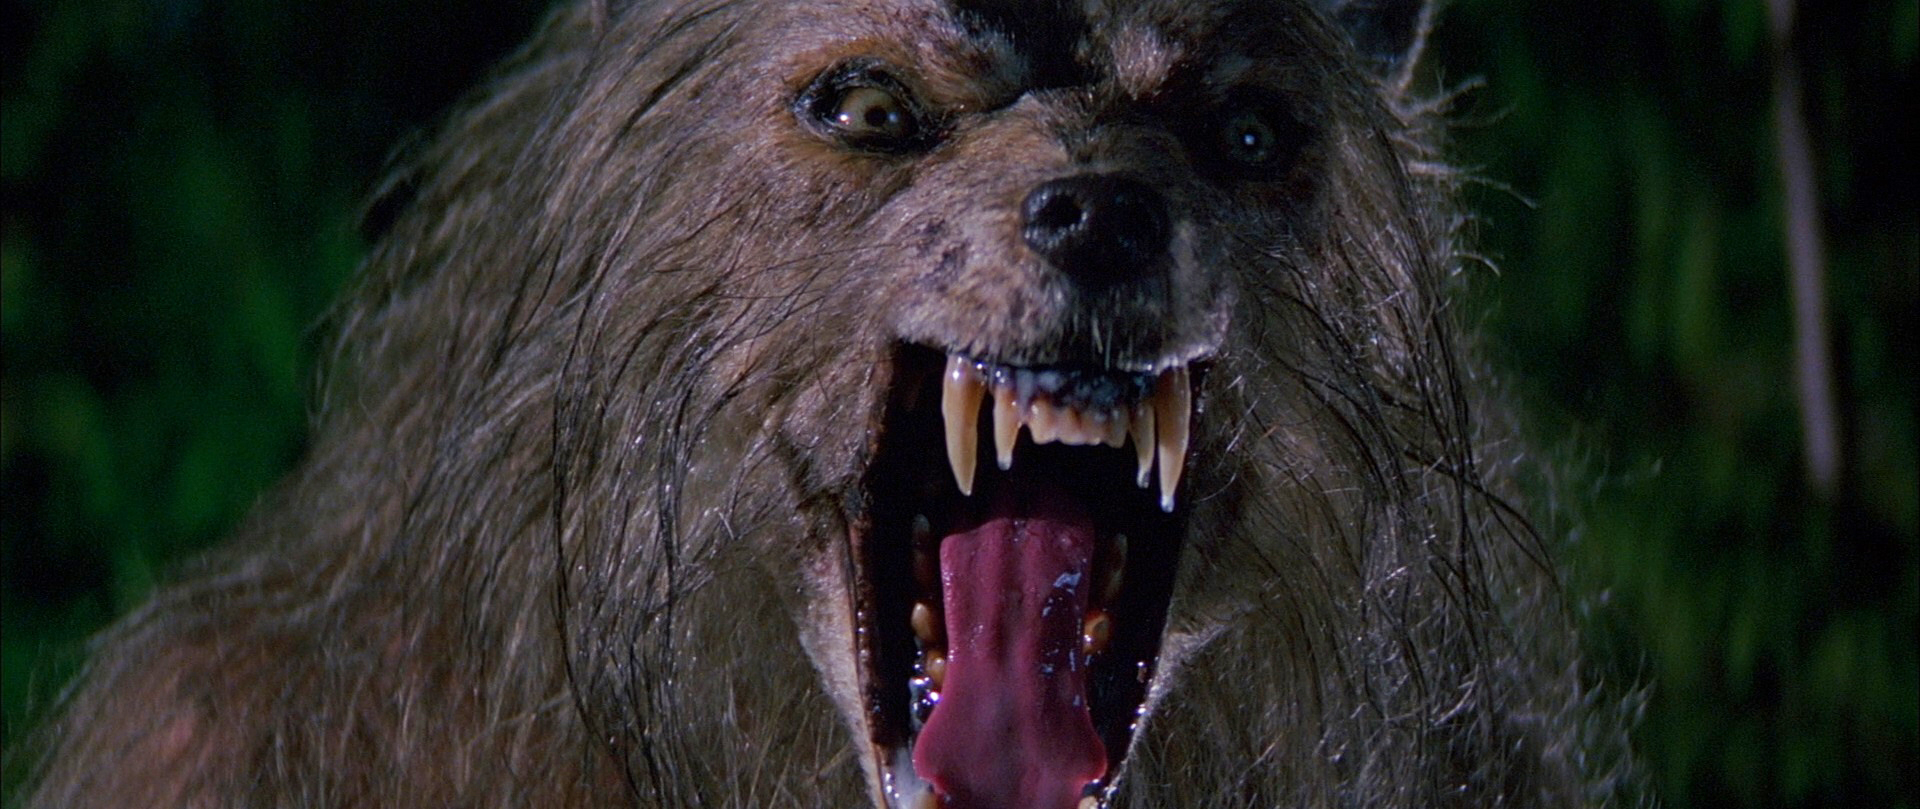 'Bad Moon' is now available on Blu-Ray from Scream Factory!